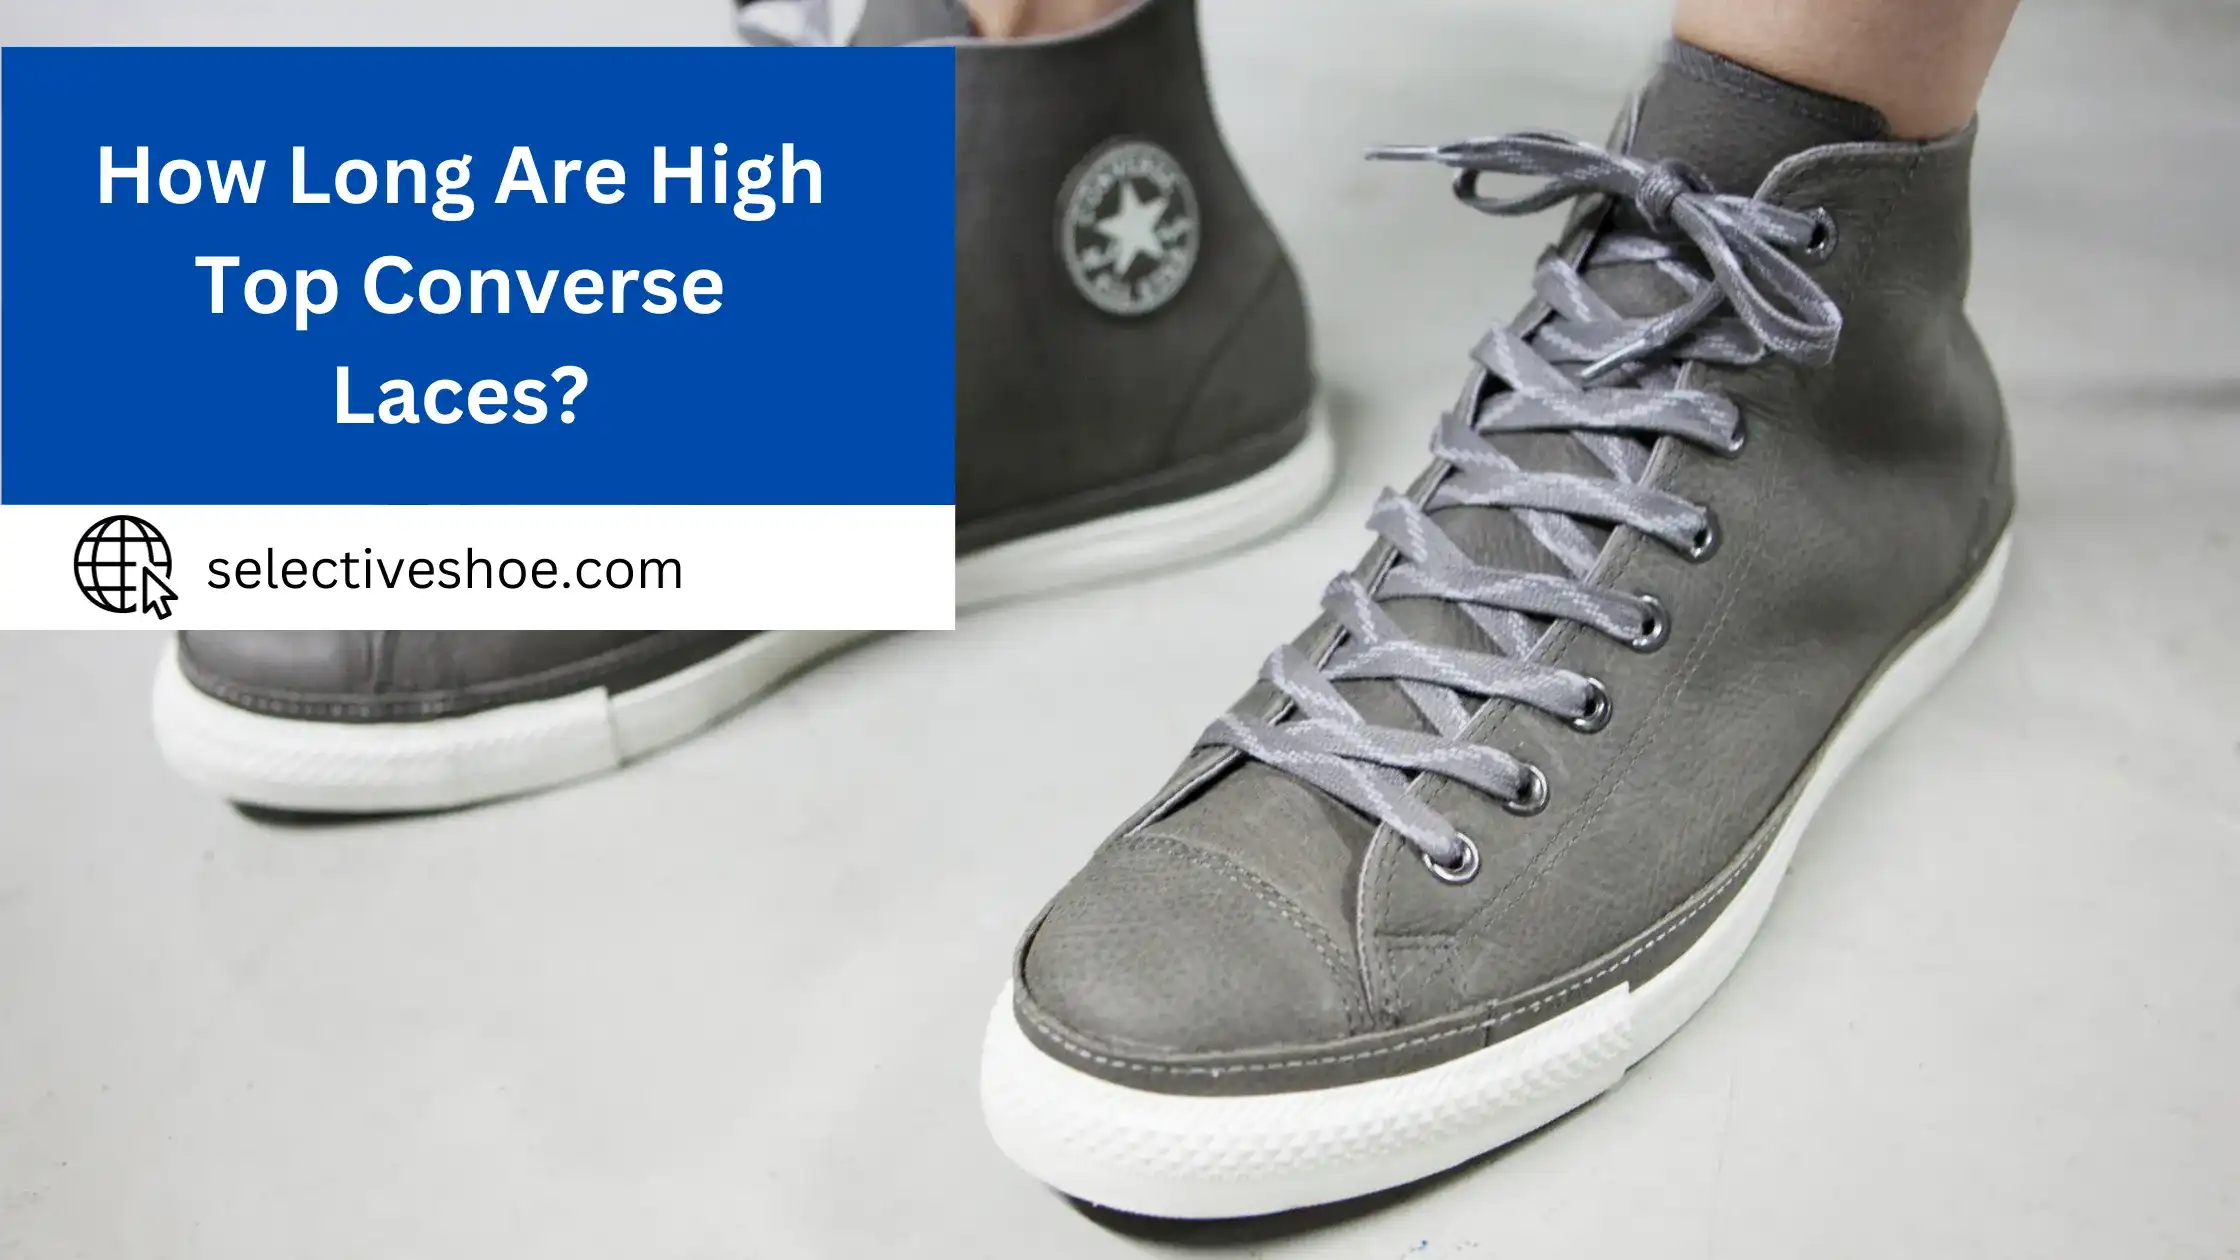 How Long Are High Top Converse Laces? (An In-Depth Guide)